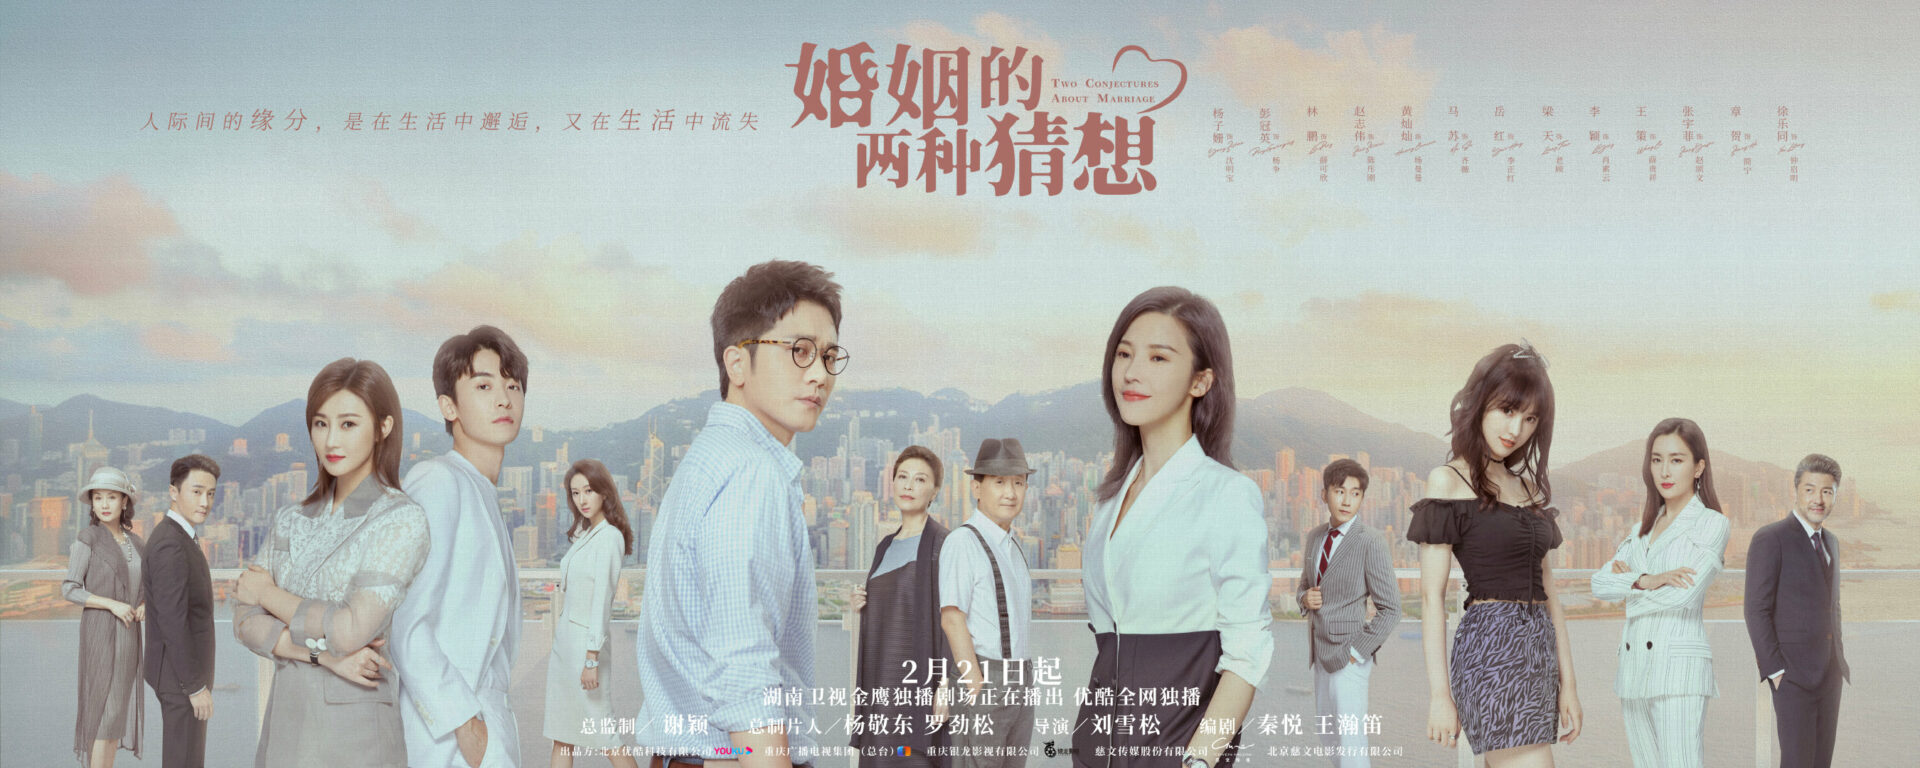 Drama “Two Conjectures About Marriage” Finale - Peng Guan Ying